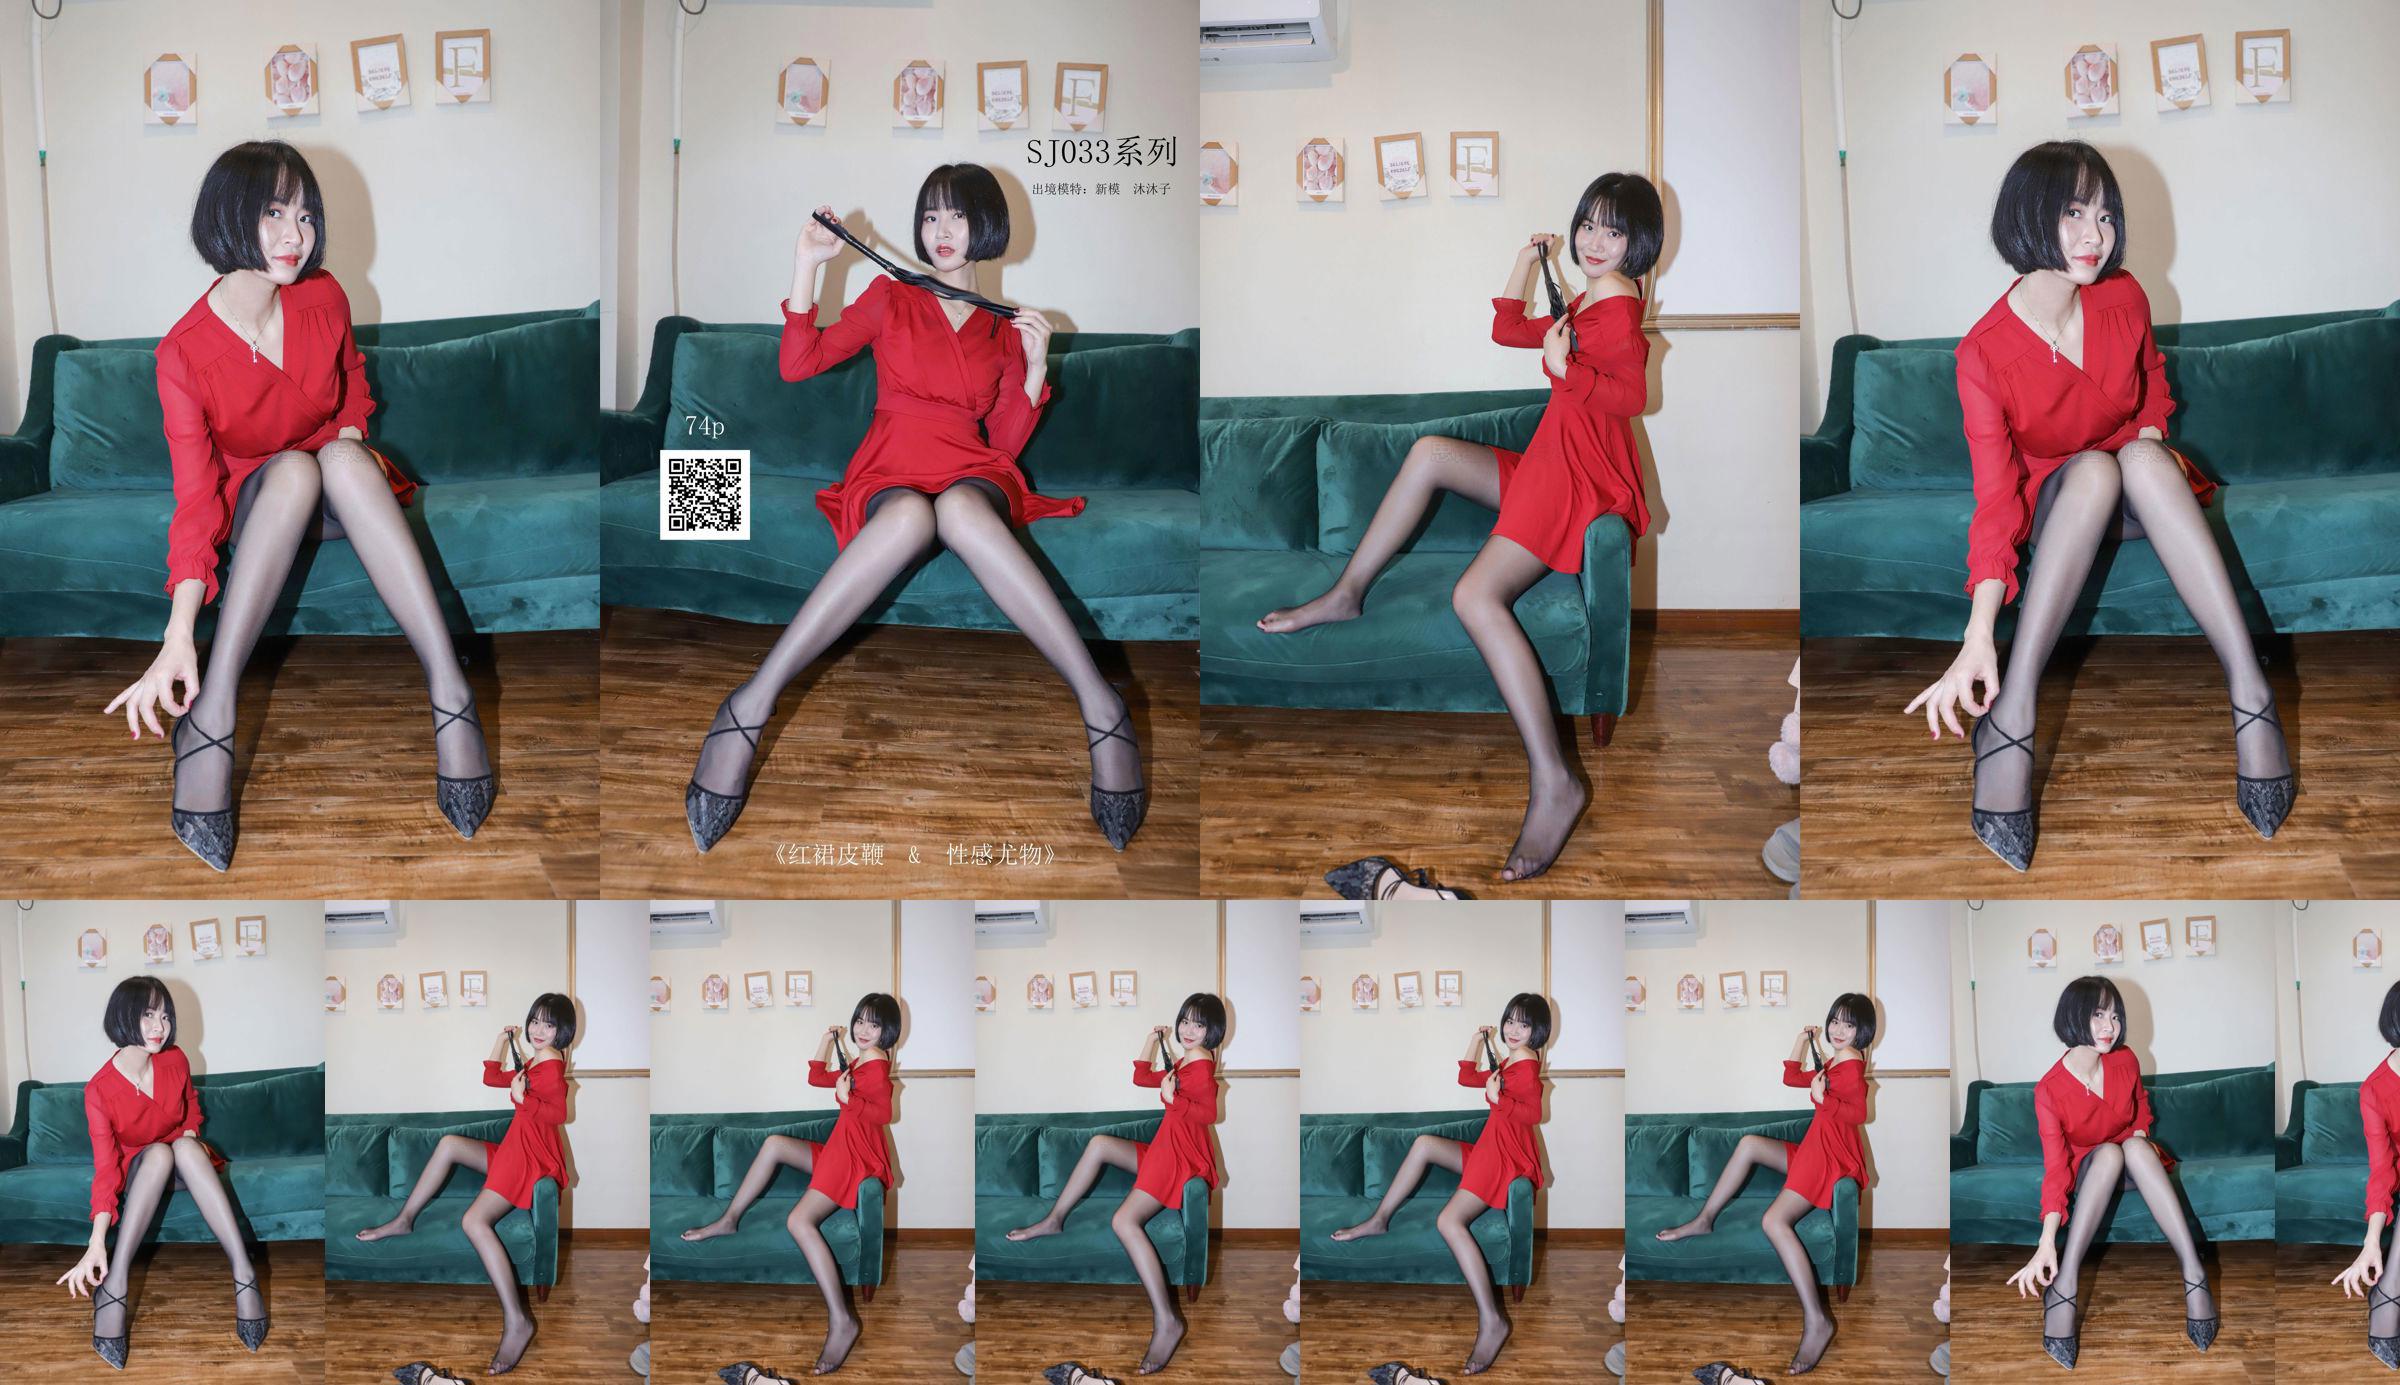 [Thinking words SiHua] SJ033 new model Mu Muzi red skirt leather whip の sexy stunner No.624a37 Page 1